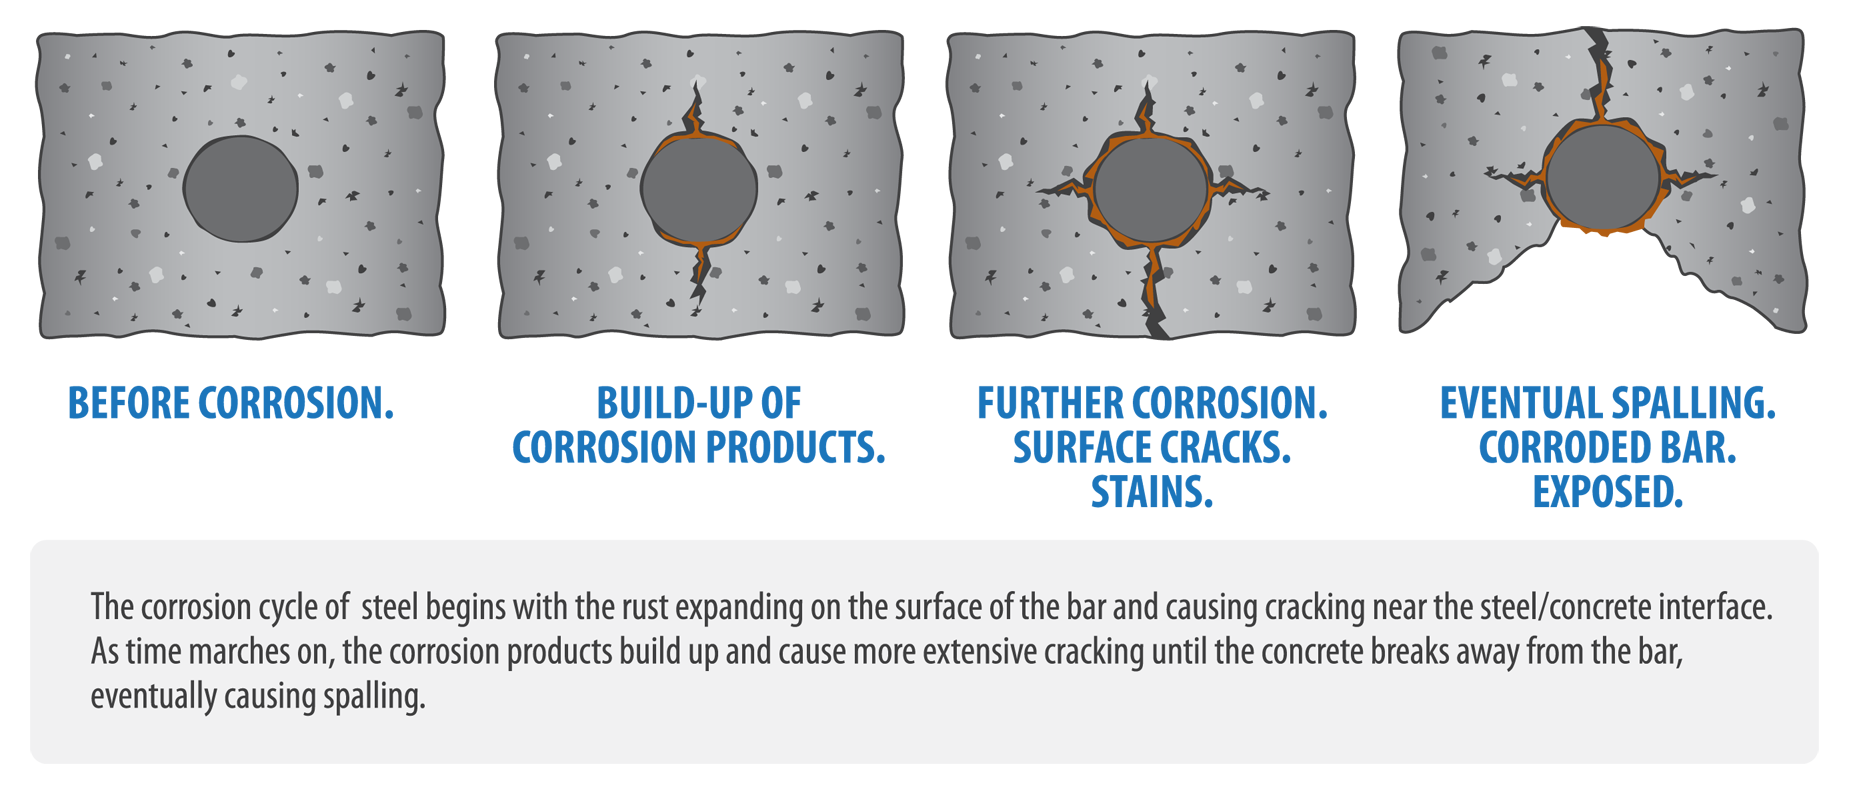 Carbonation and Corrosion